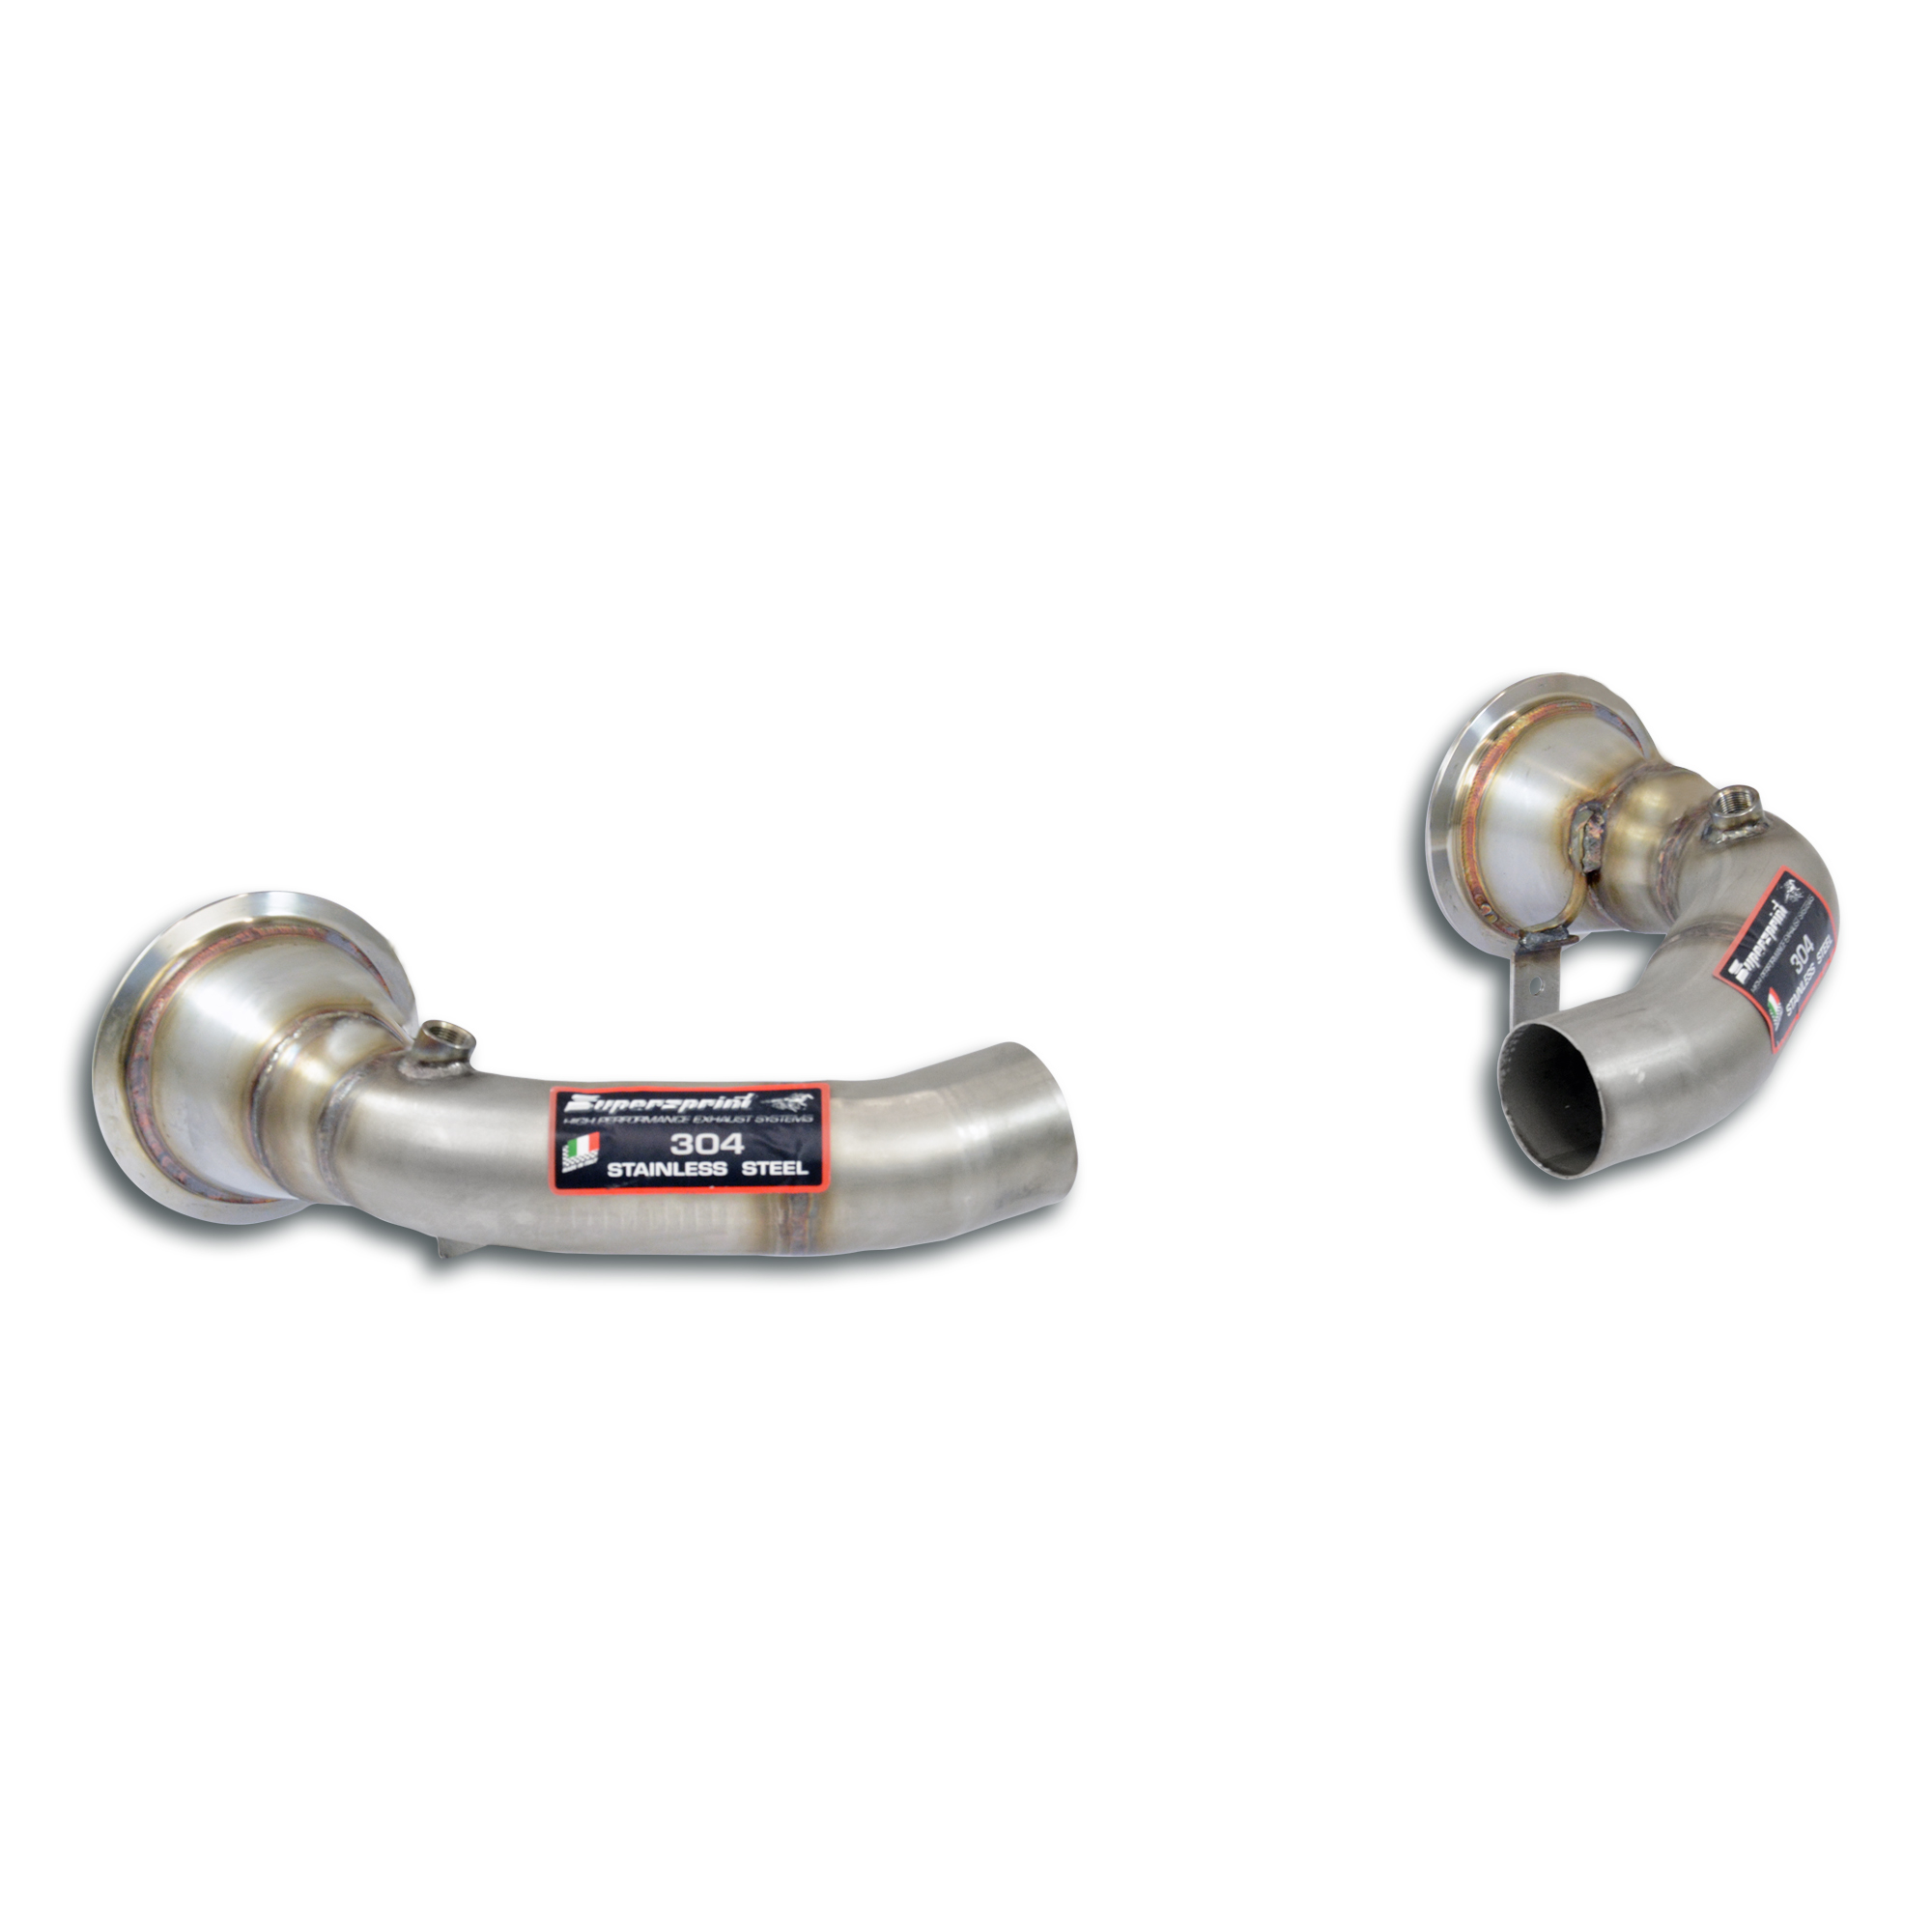 Downpipe Supersprint 860711